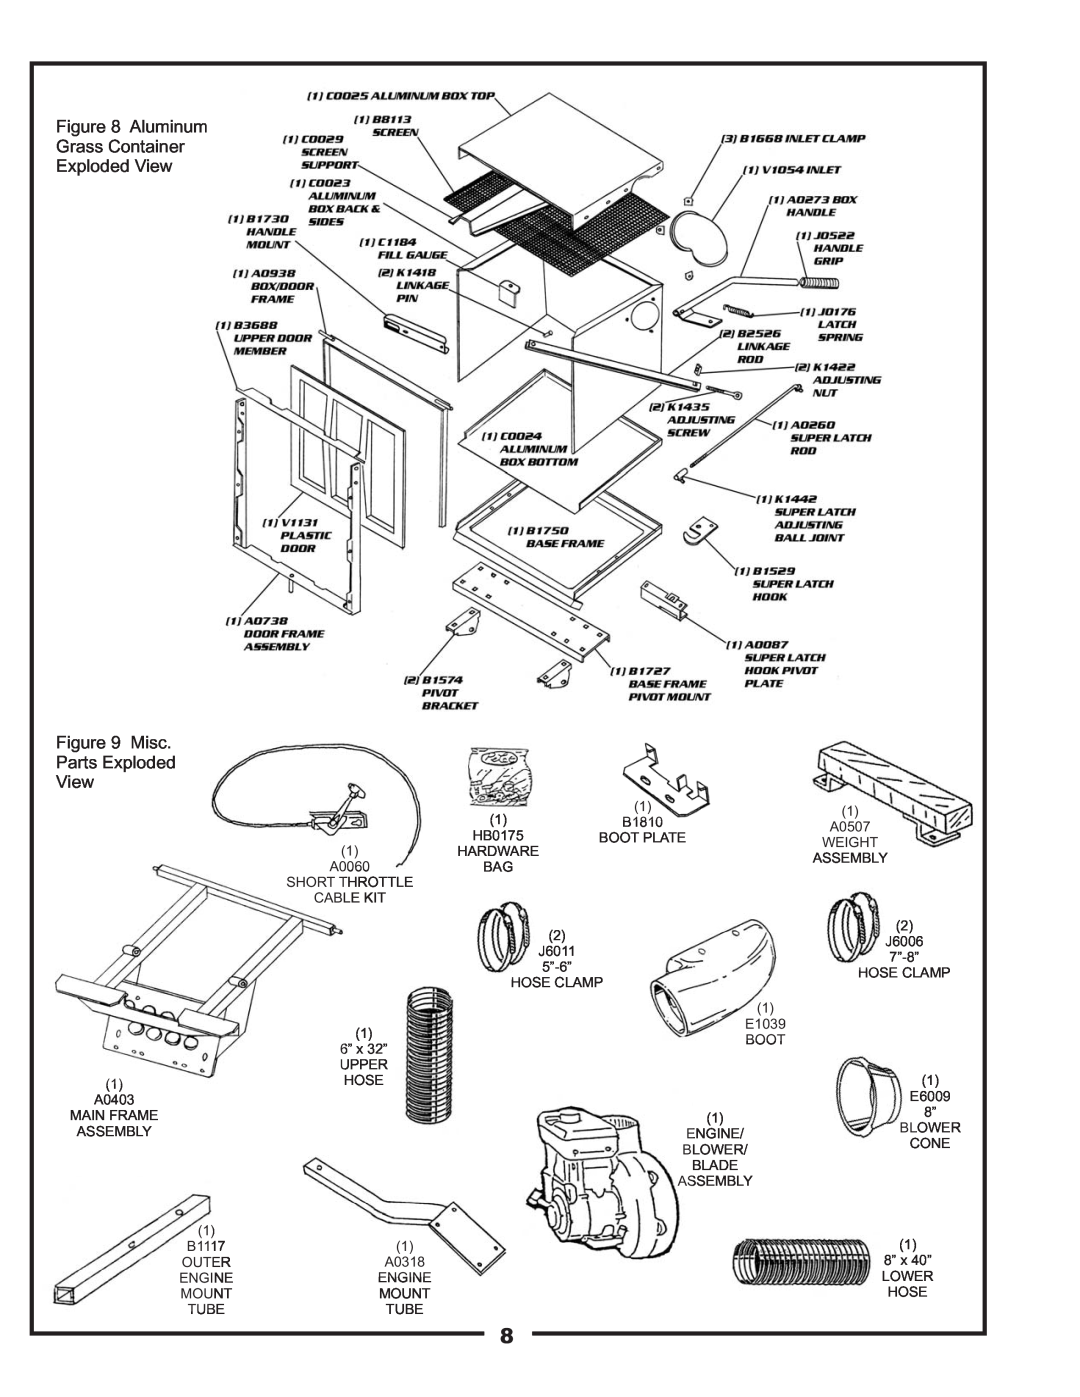 Toro 22621223-24 manual Aluminum Grass Container Exploded View Misc, Parts Exploded View, A0318 